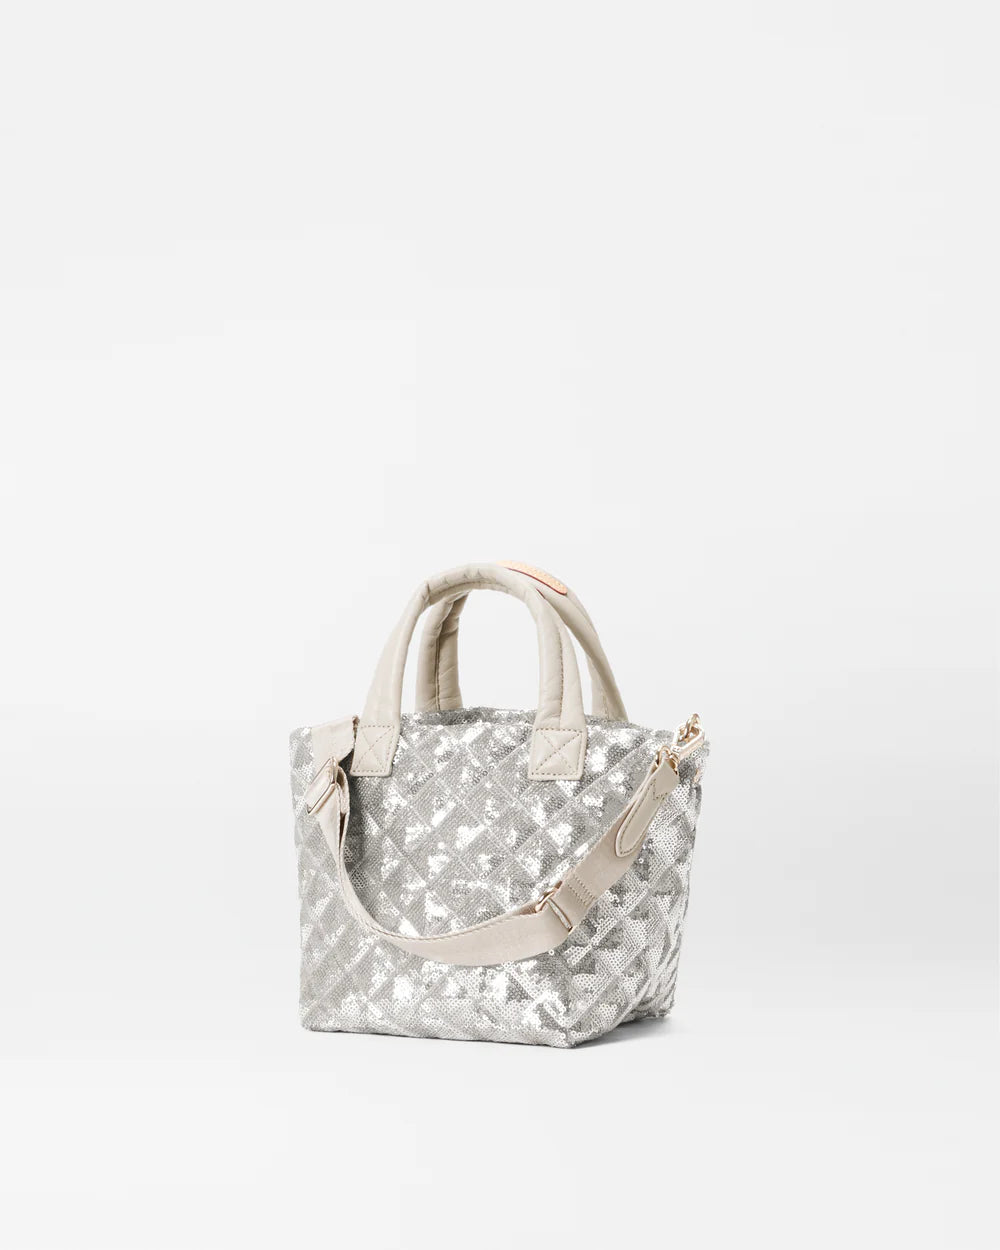 MZ WALLACE MICRO METRO TOTE DELUXE IN ICE SEQUIN